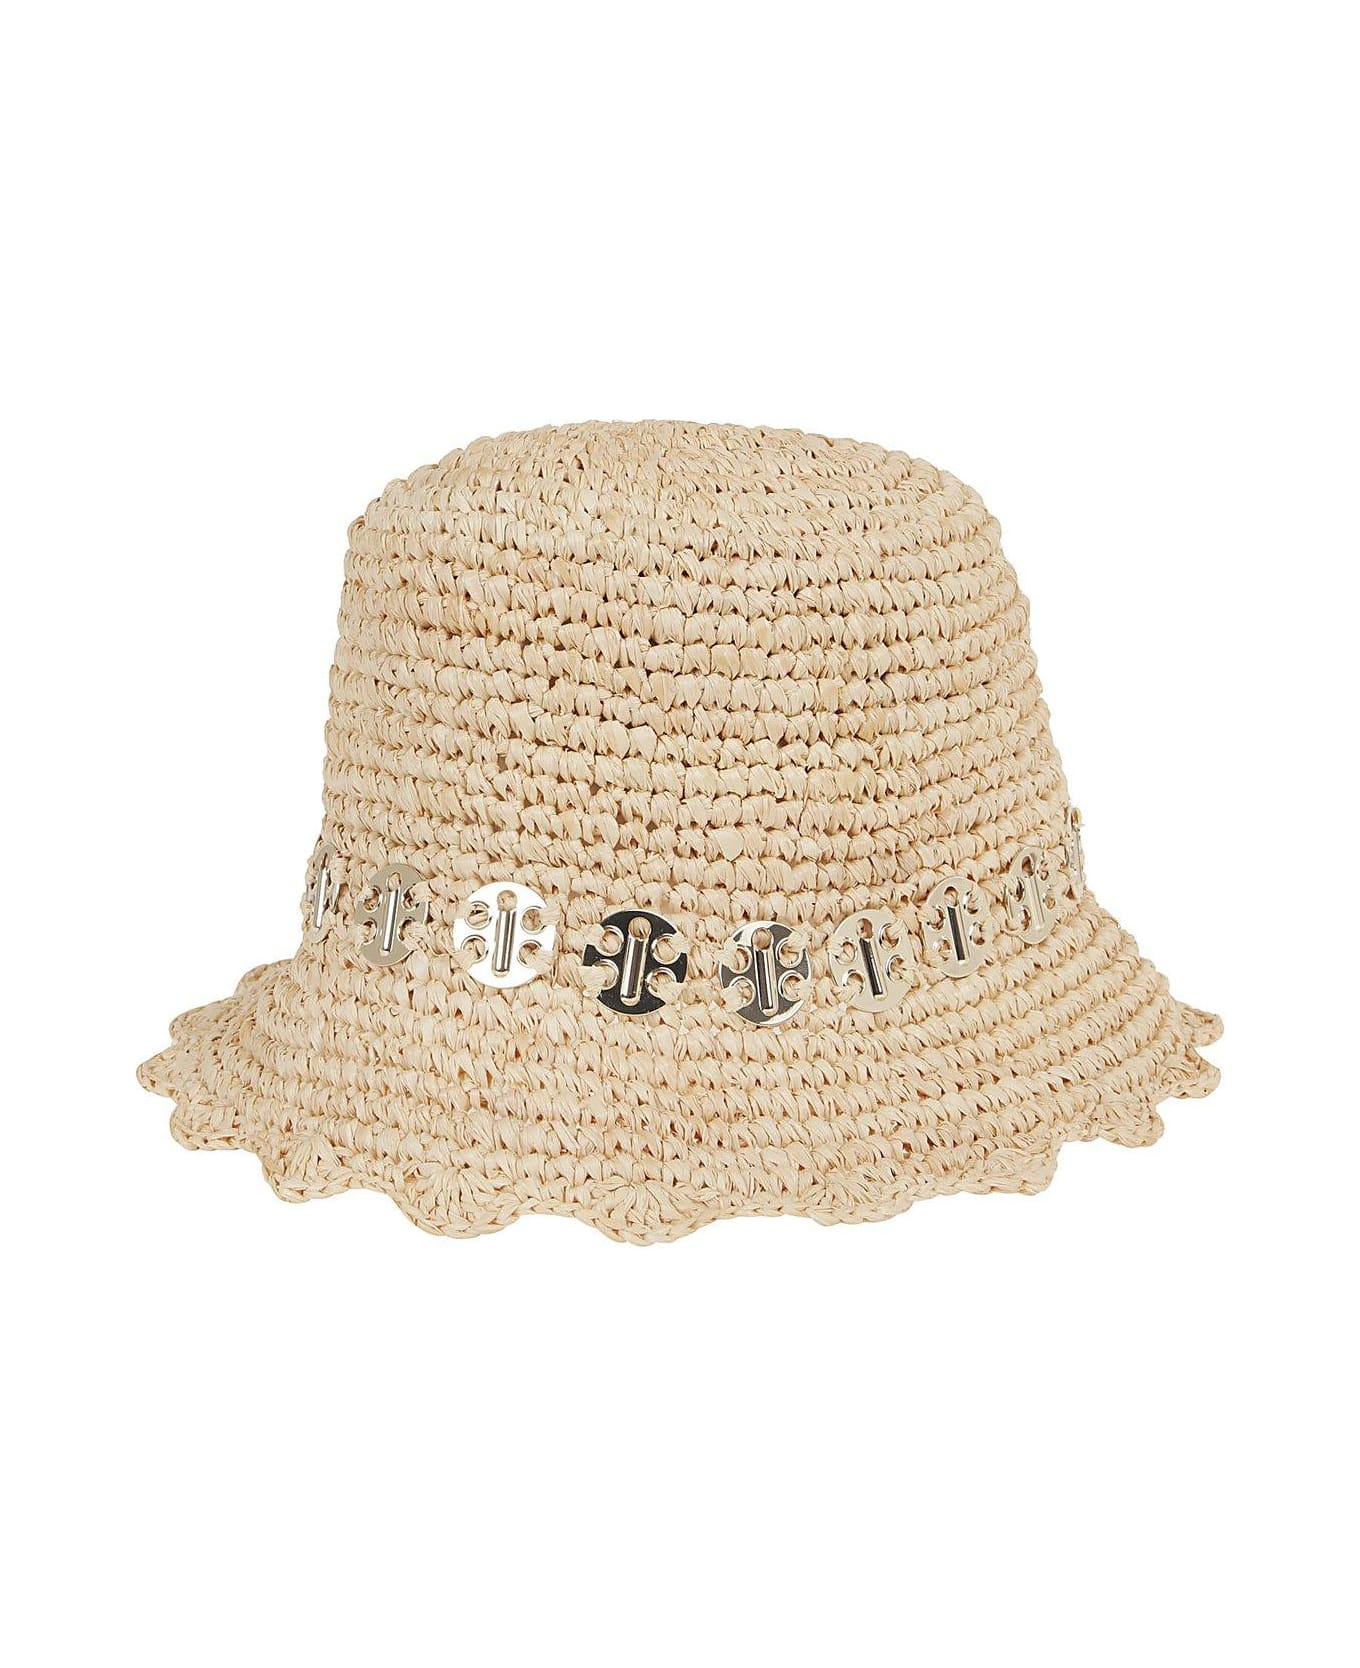 Paco Rabanne Chain-linked Bucket Hat - NATURAL LIGHT GOLD 帽子